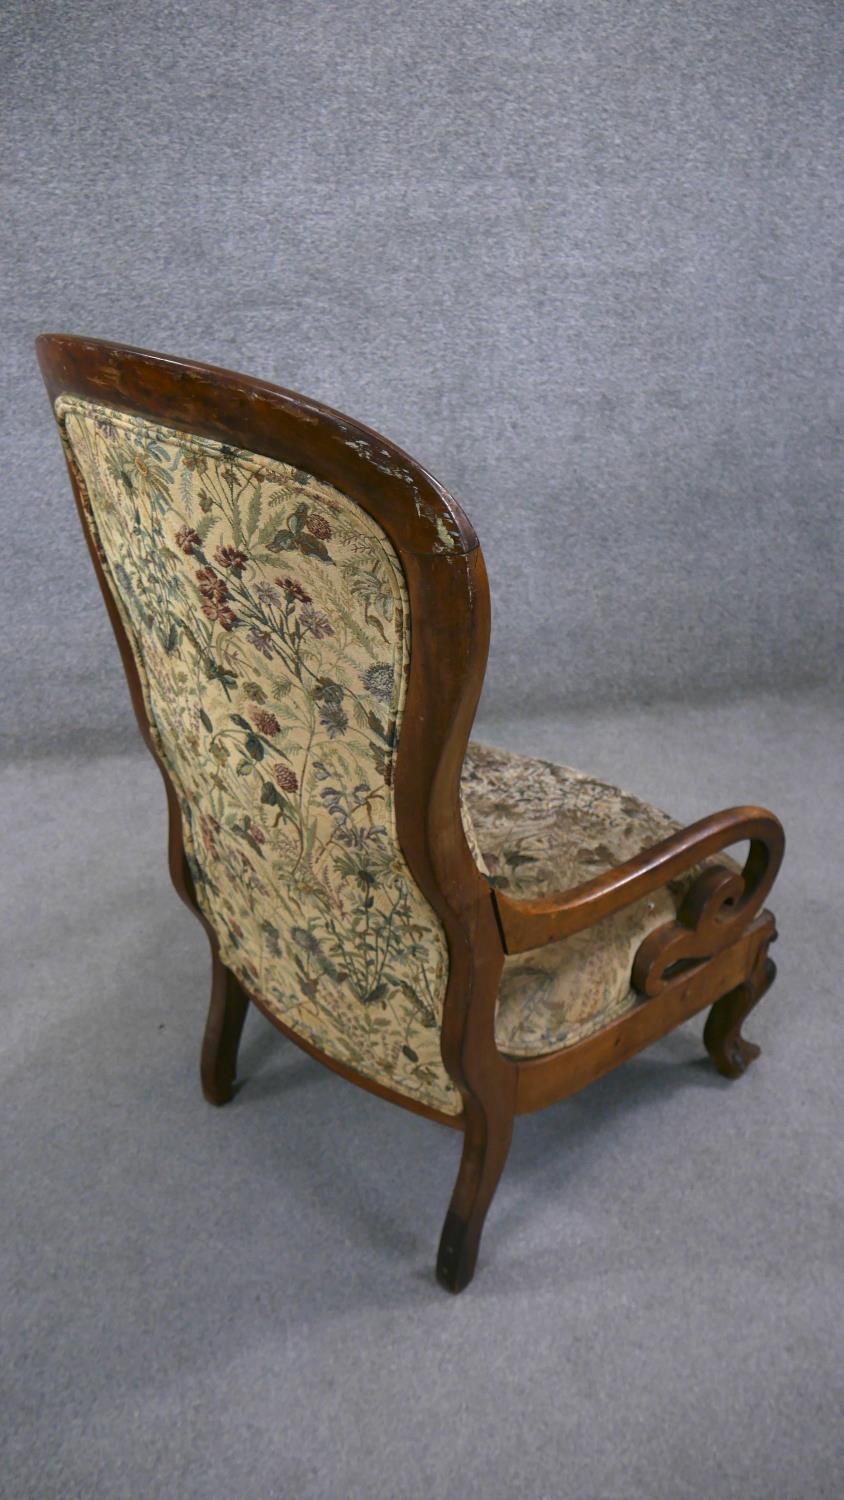 A 19th century mahogany framed spoon back armchair in deep buttoned upholstery on carved cabriole - Image 5 of 5